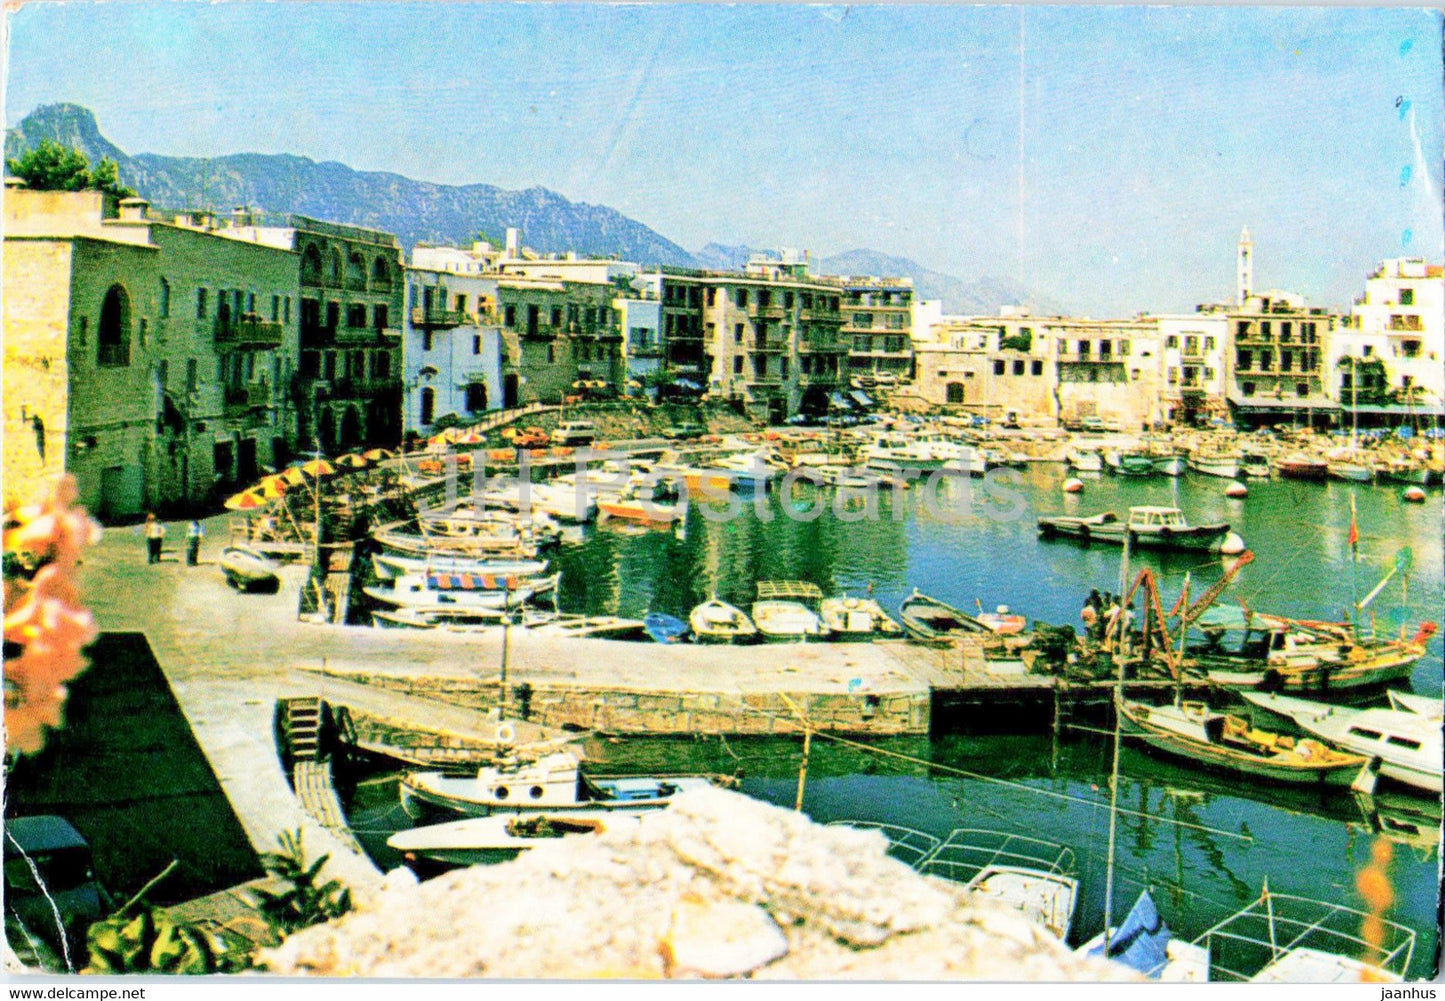 Kyrenia - images from Girne - boat - Cyprus - used - JH Postcards